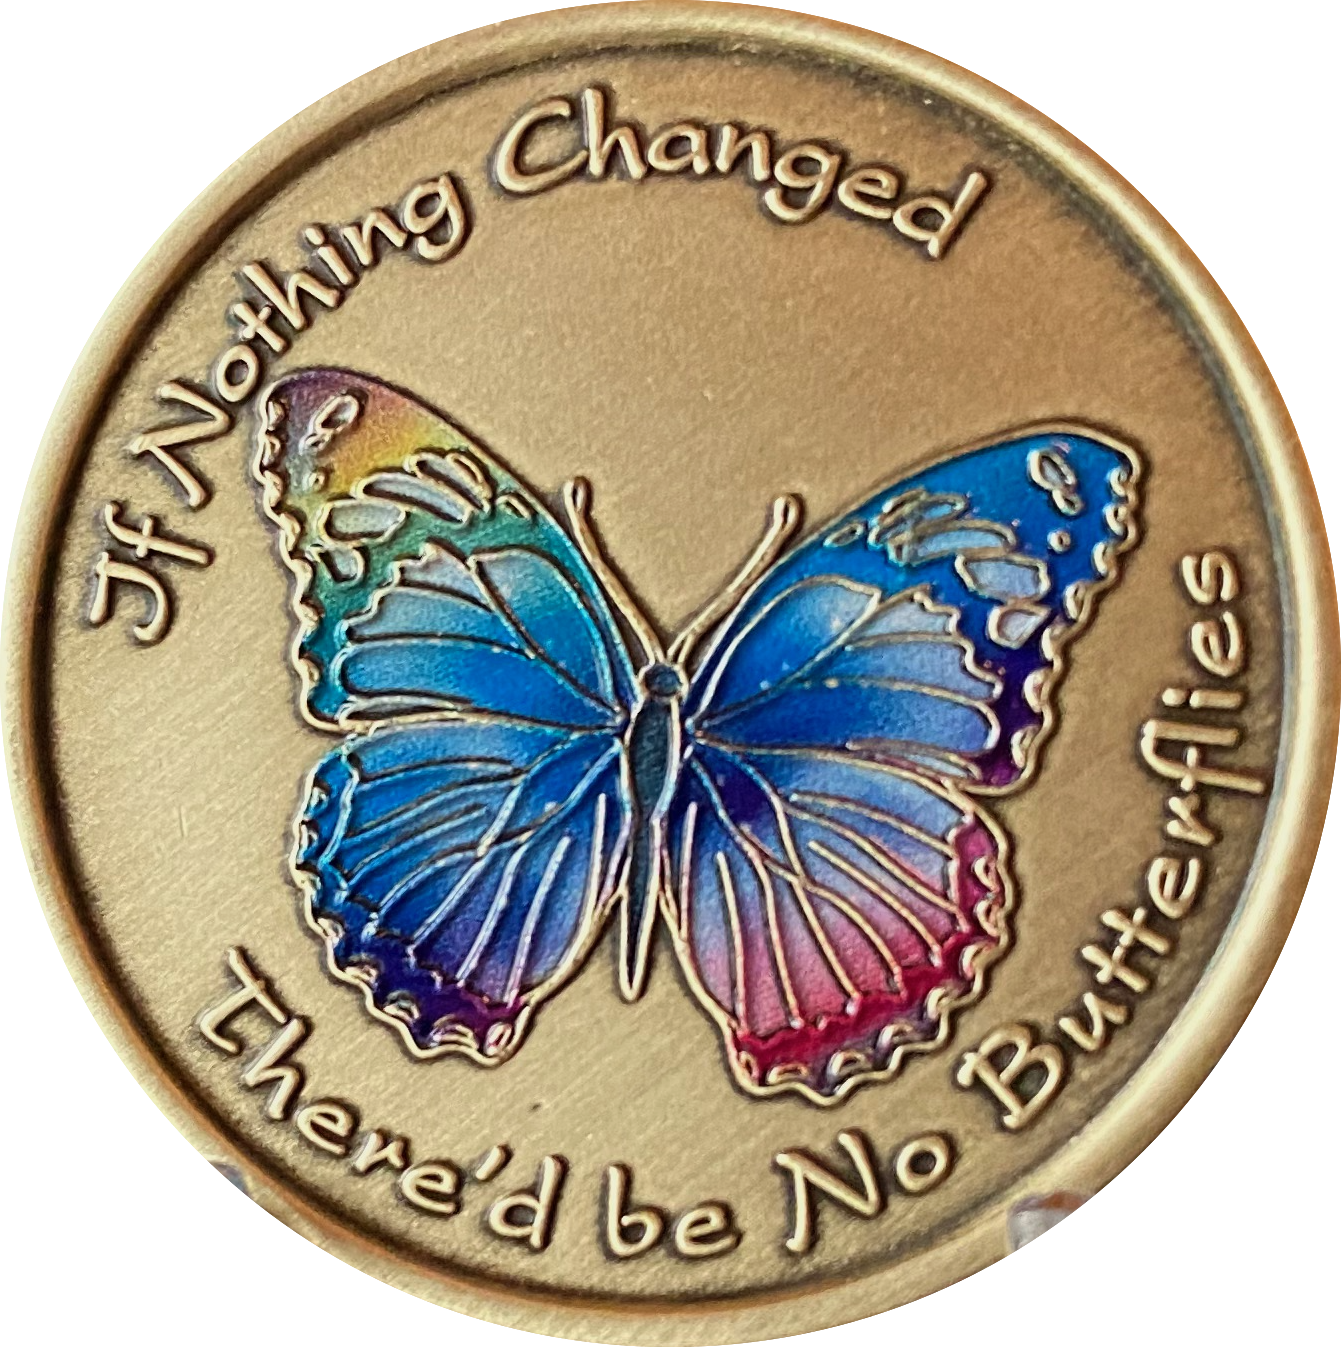 If Nothing Changed There'd Be No Butterflies Rainbow Butterfly Medallion Coin